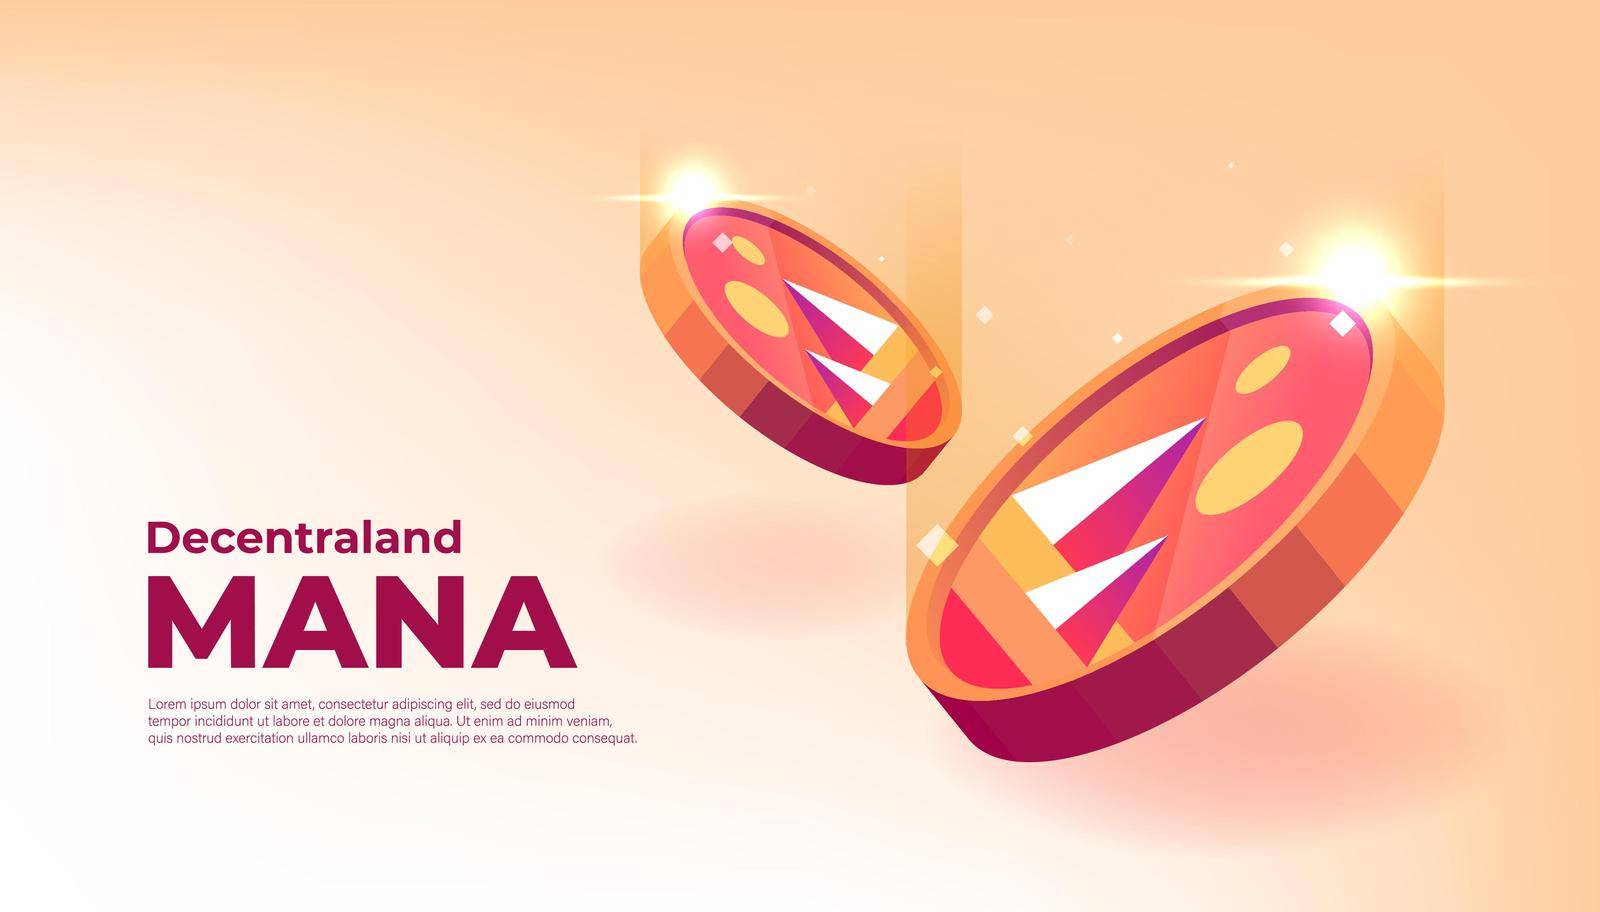 Decentraland (MANA) banner. MANA coin cryptocurrency concept banner background.